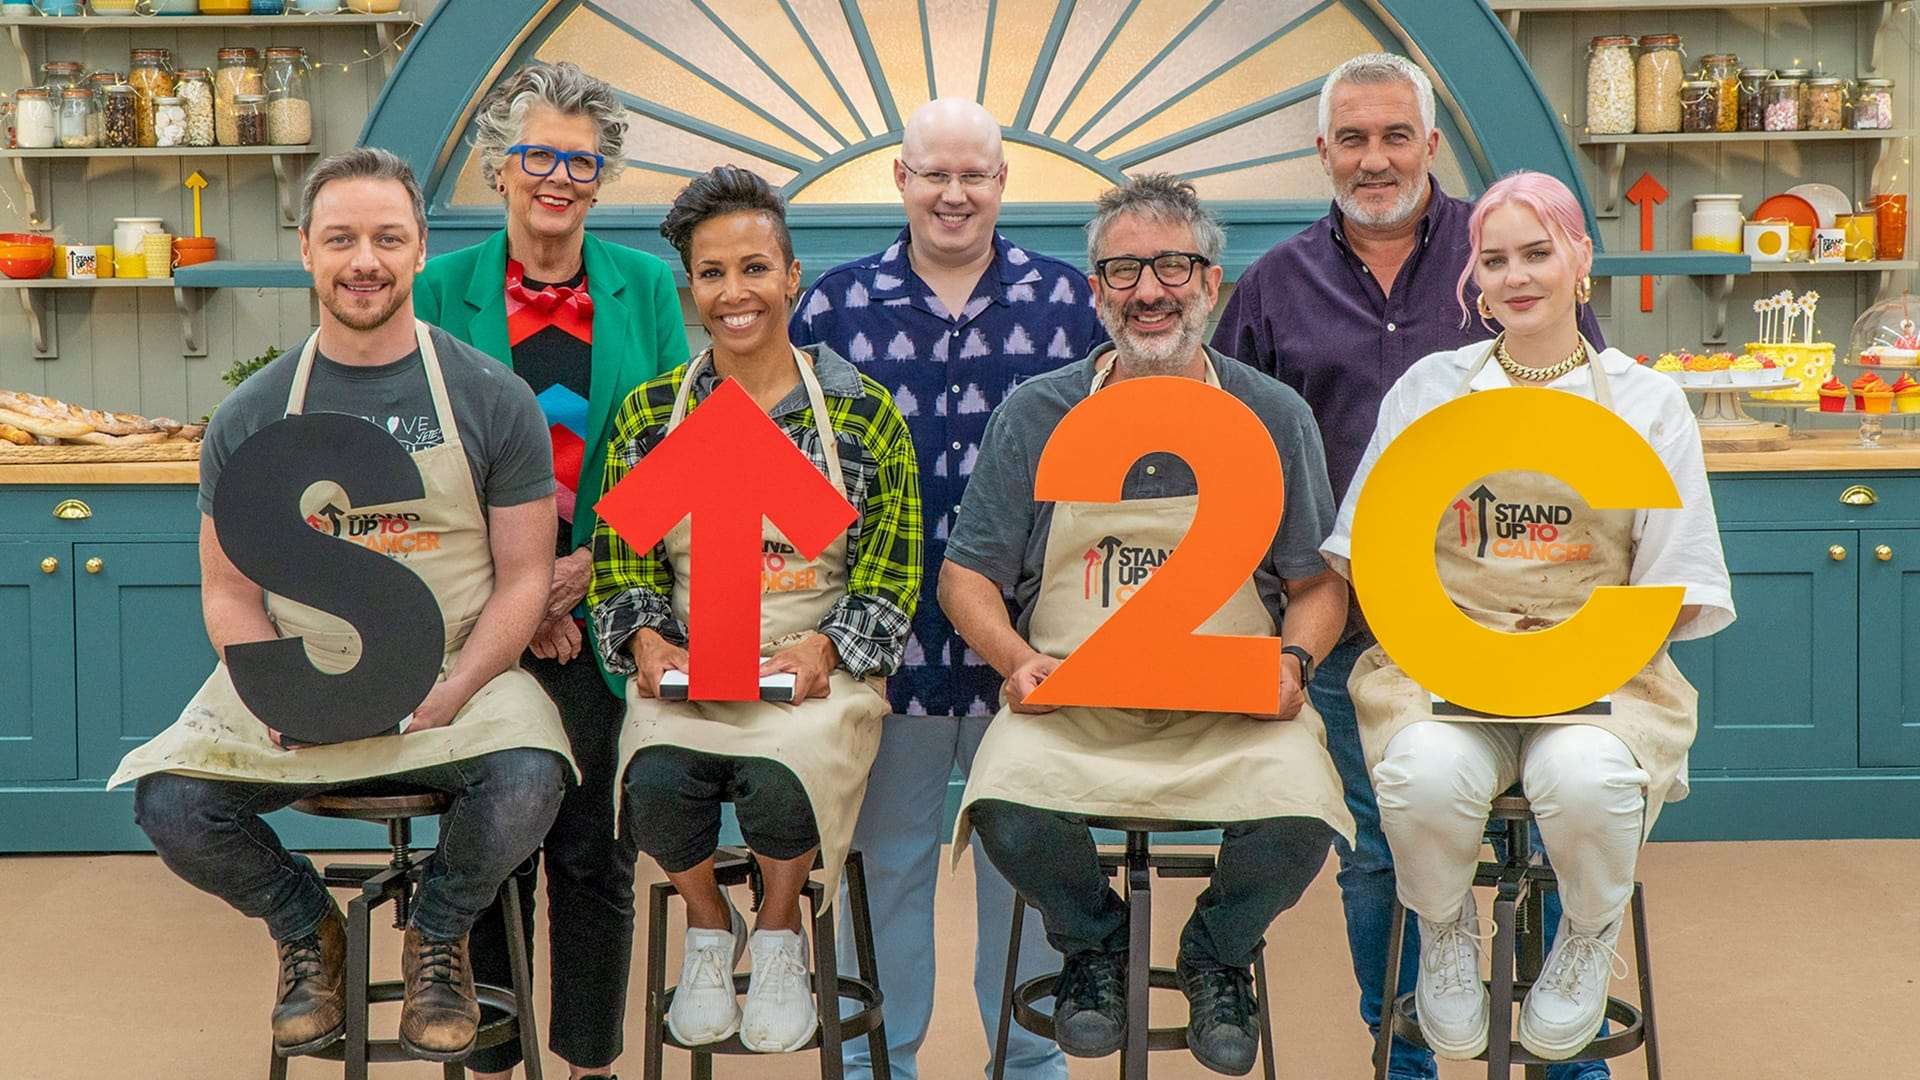 Watch The Great Celebrity Bake Off for SU2C